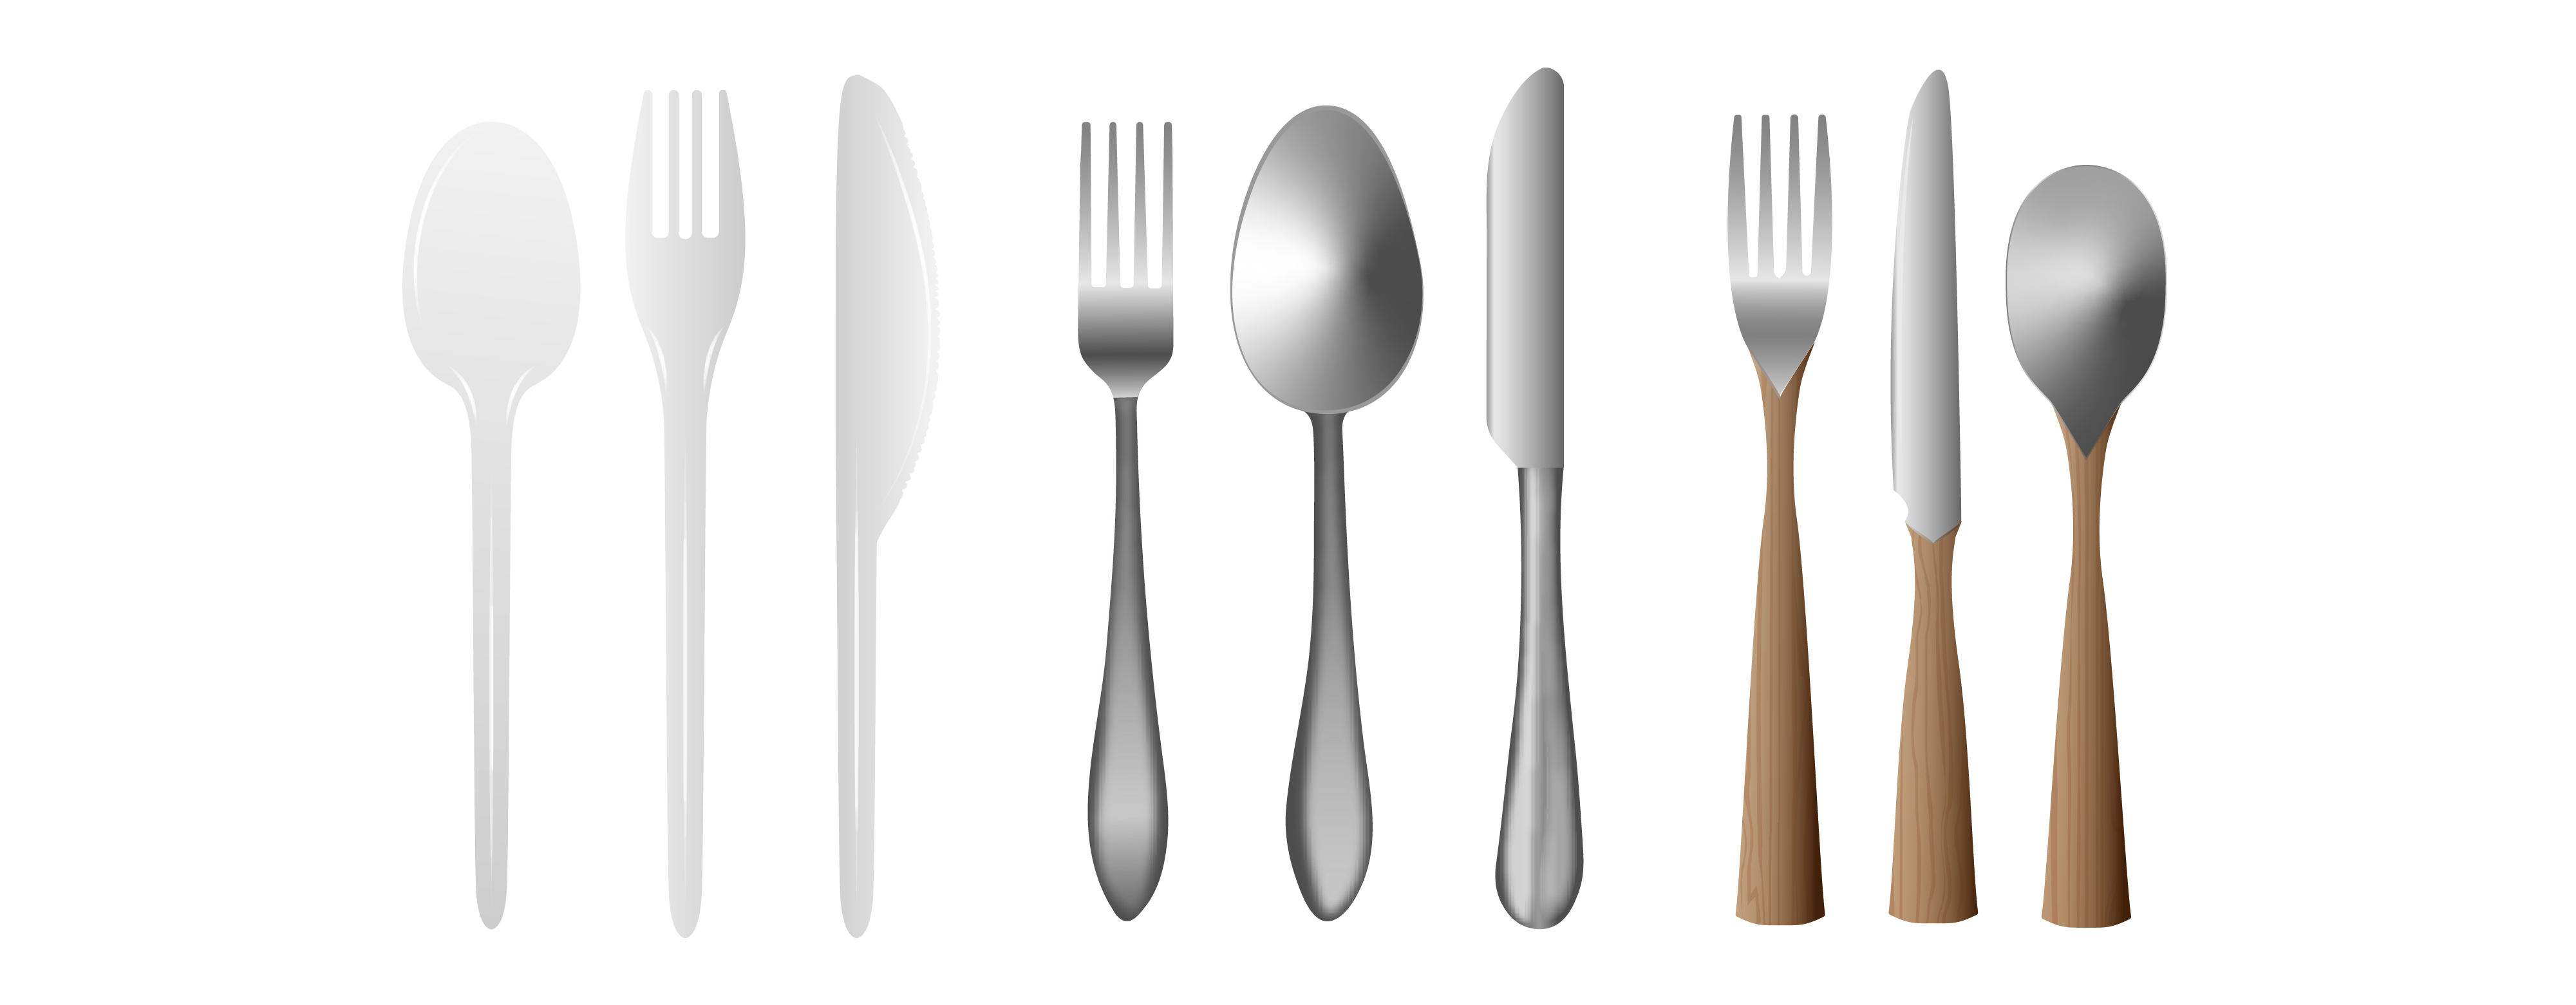 3 sets of cutlery with a spoon, fork, and knife each. First three are white, shiny, and made of plastic. The second set have rounded metal handles and metal features. Third has metal functional ends and matching wooden handles.